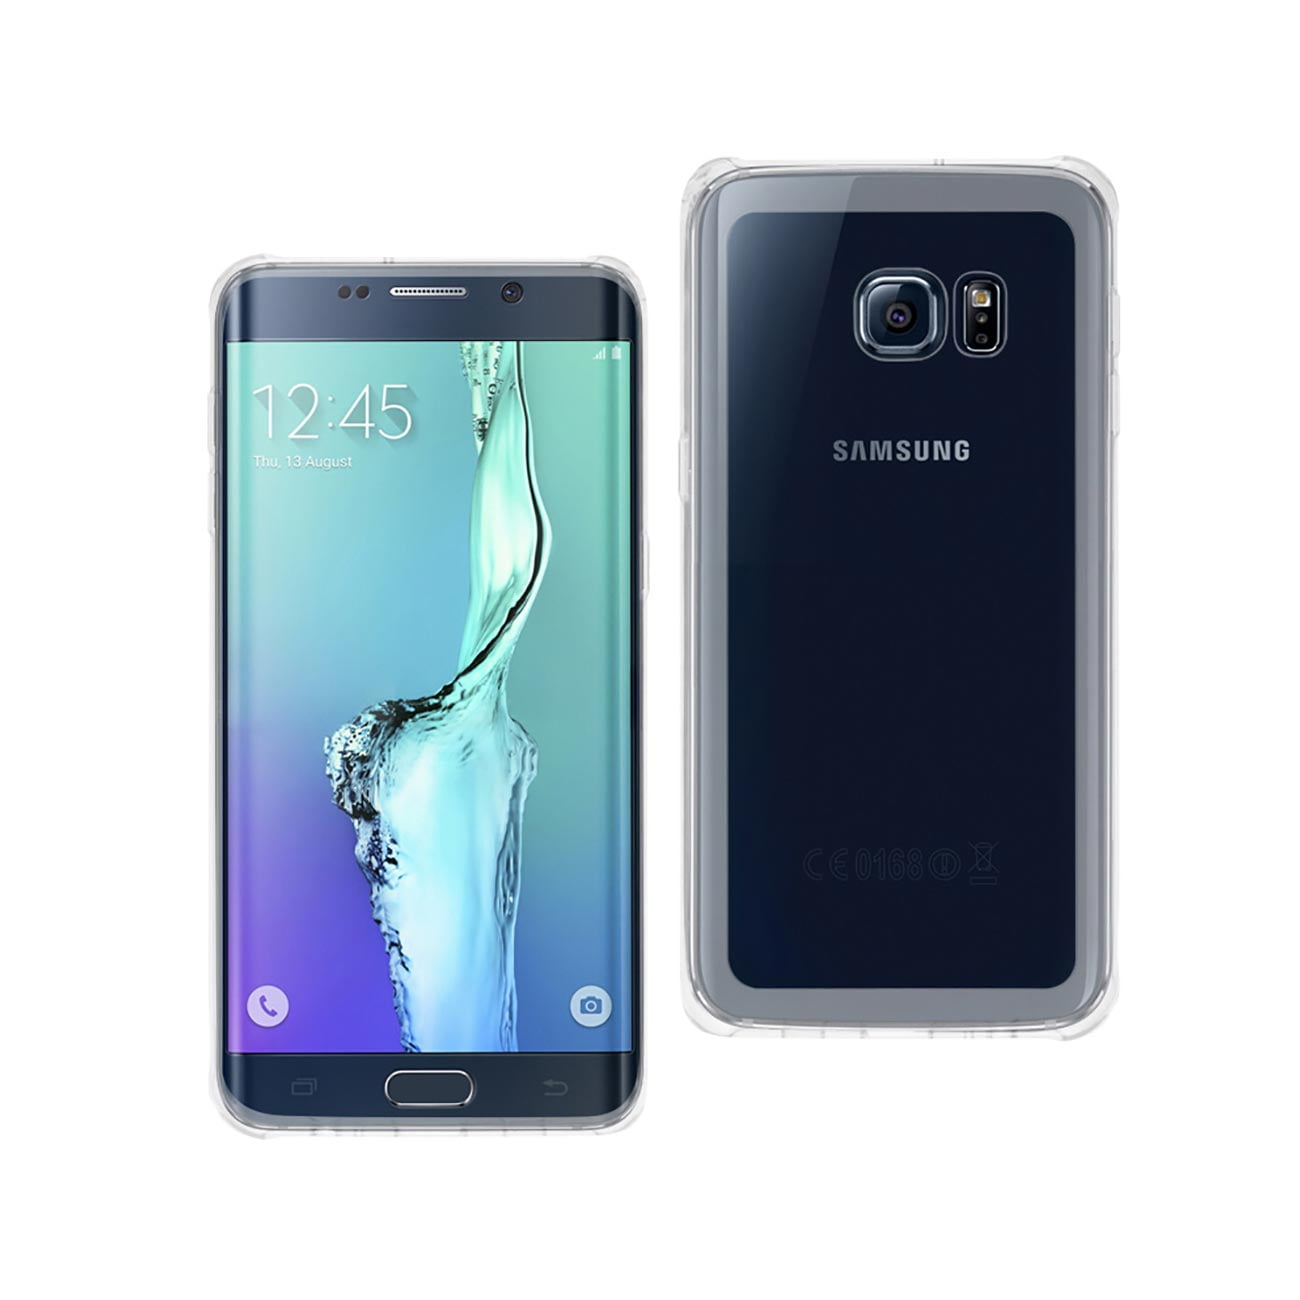 Samsung Galaxy S6 Edge Plus Mirror Effect Case With Cushion Protection In Clear Walmart.com